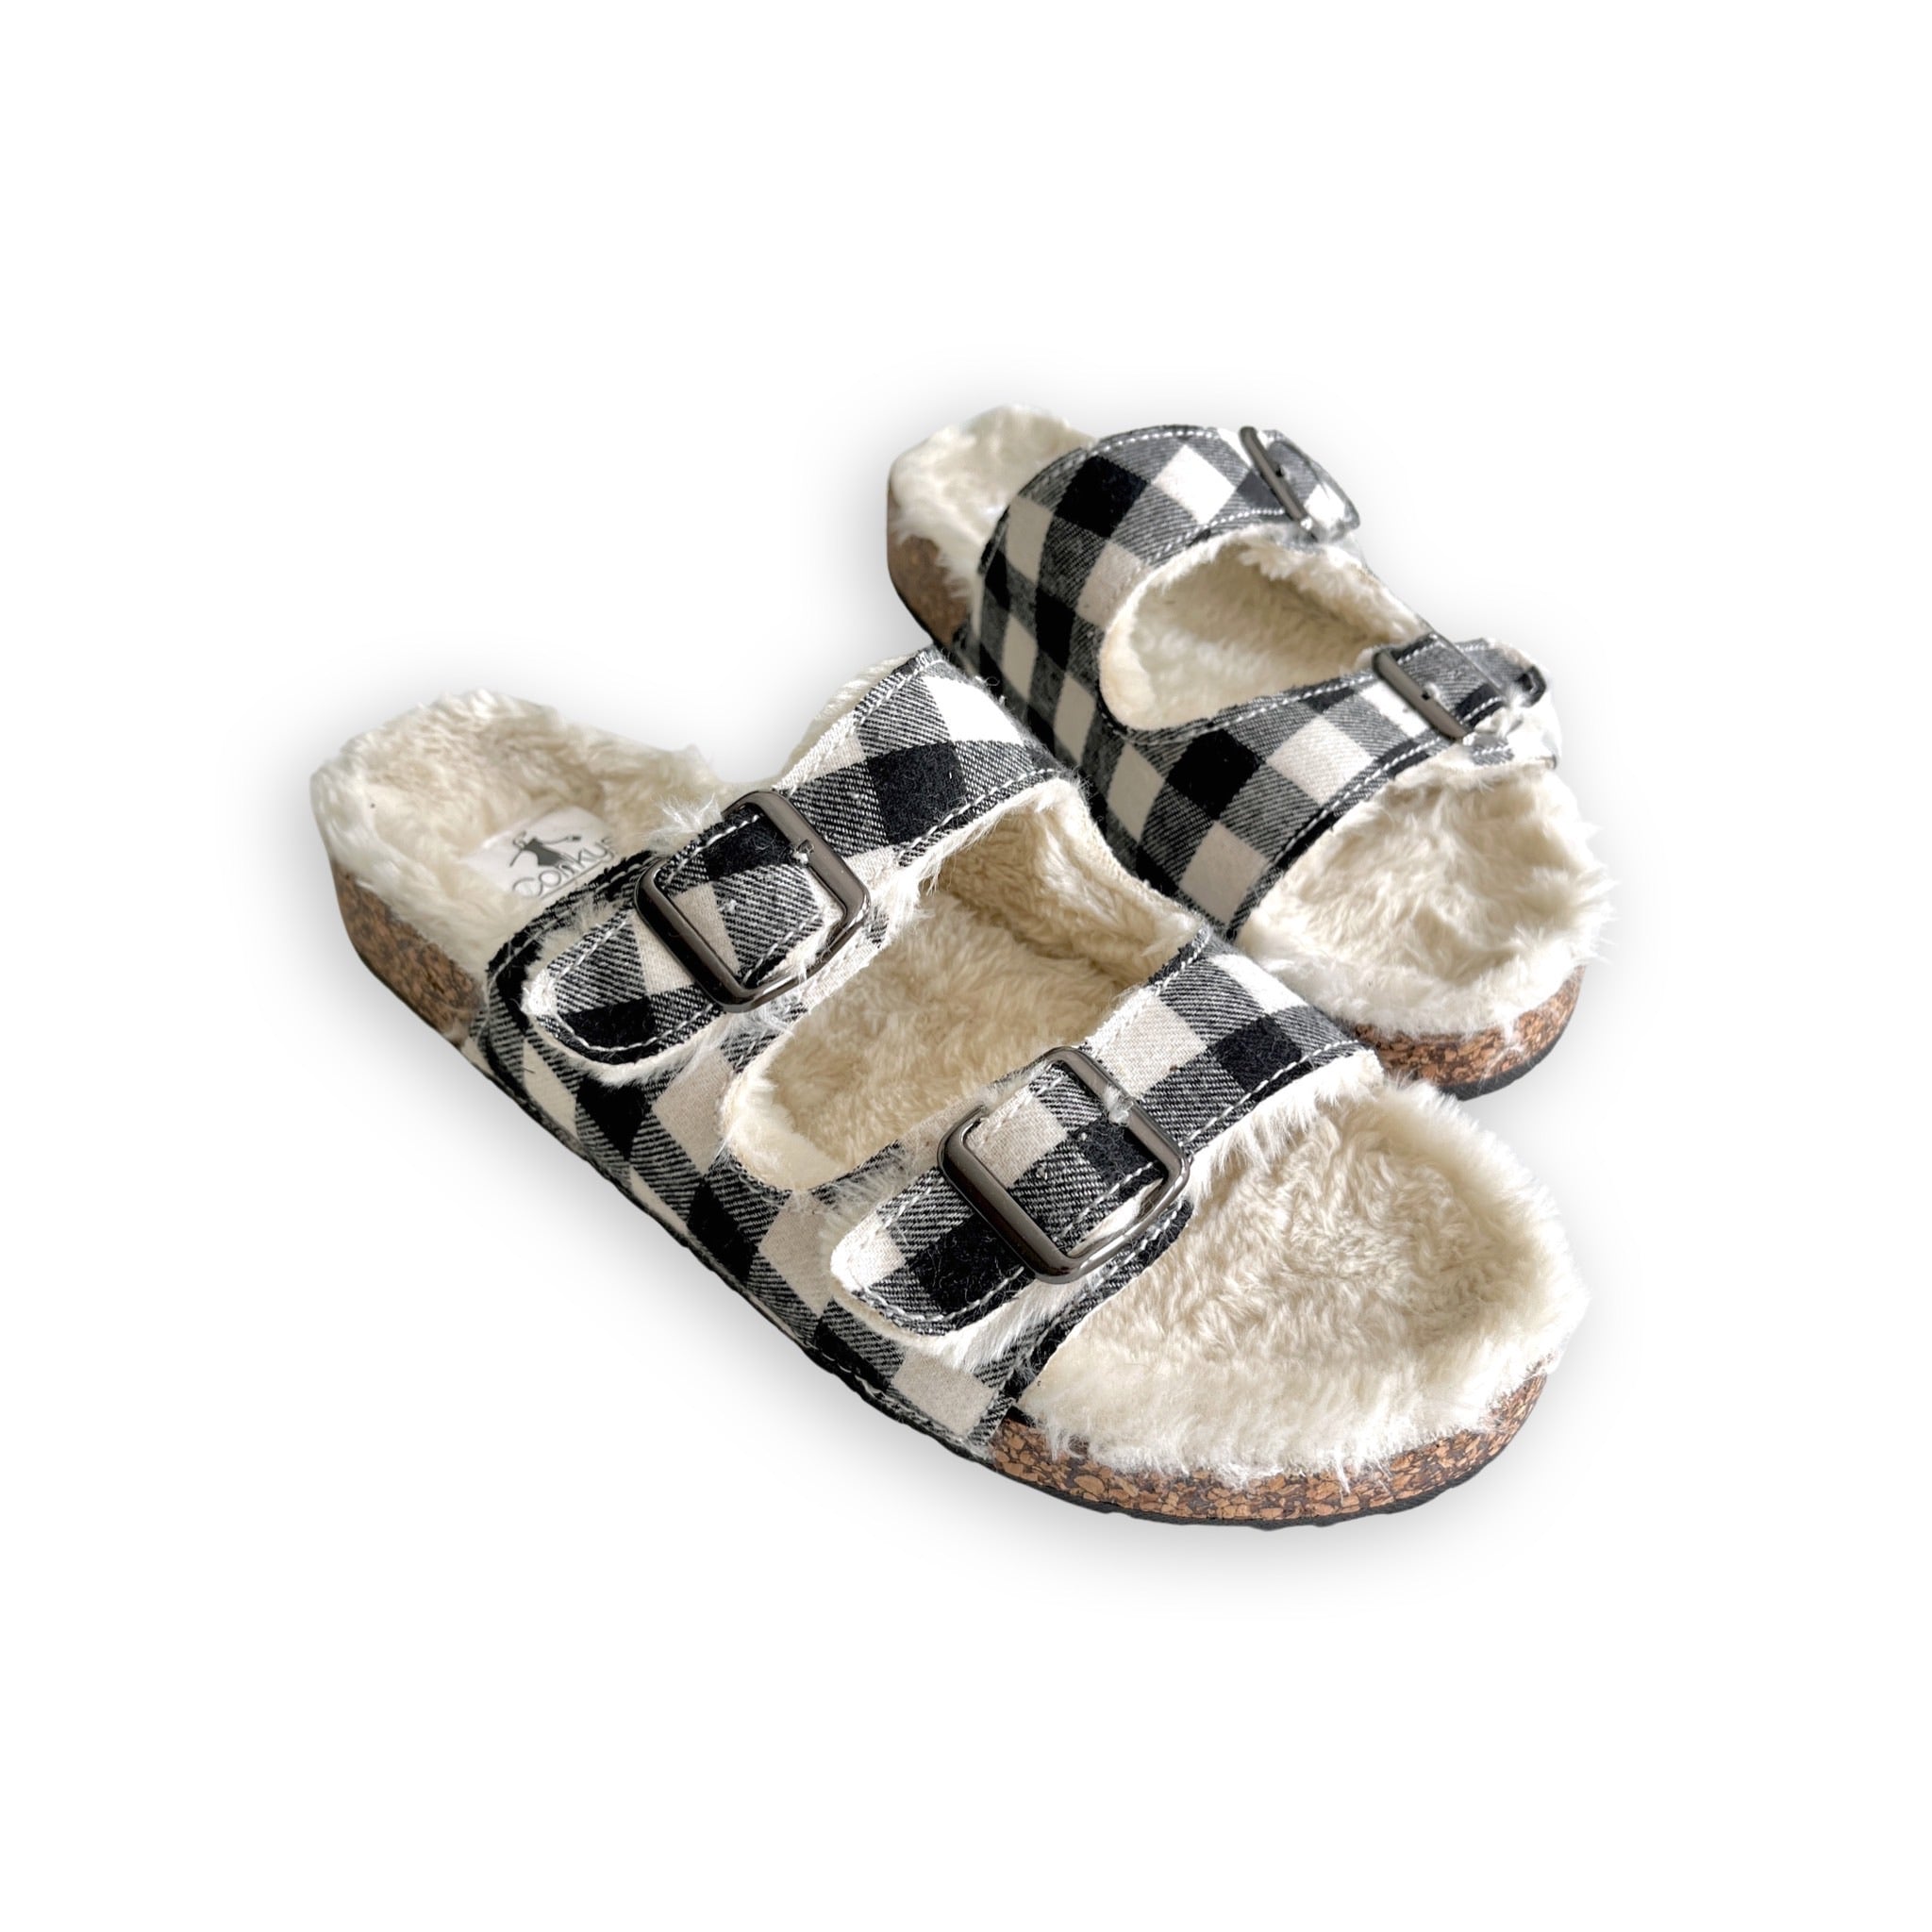 Laid Back Sandals in White Plaid